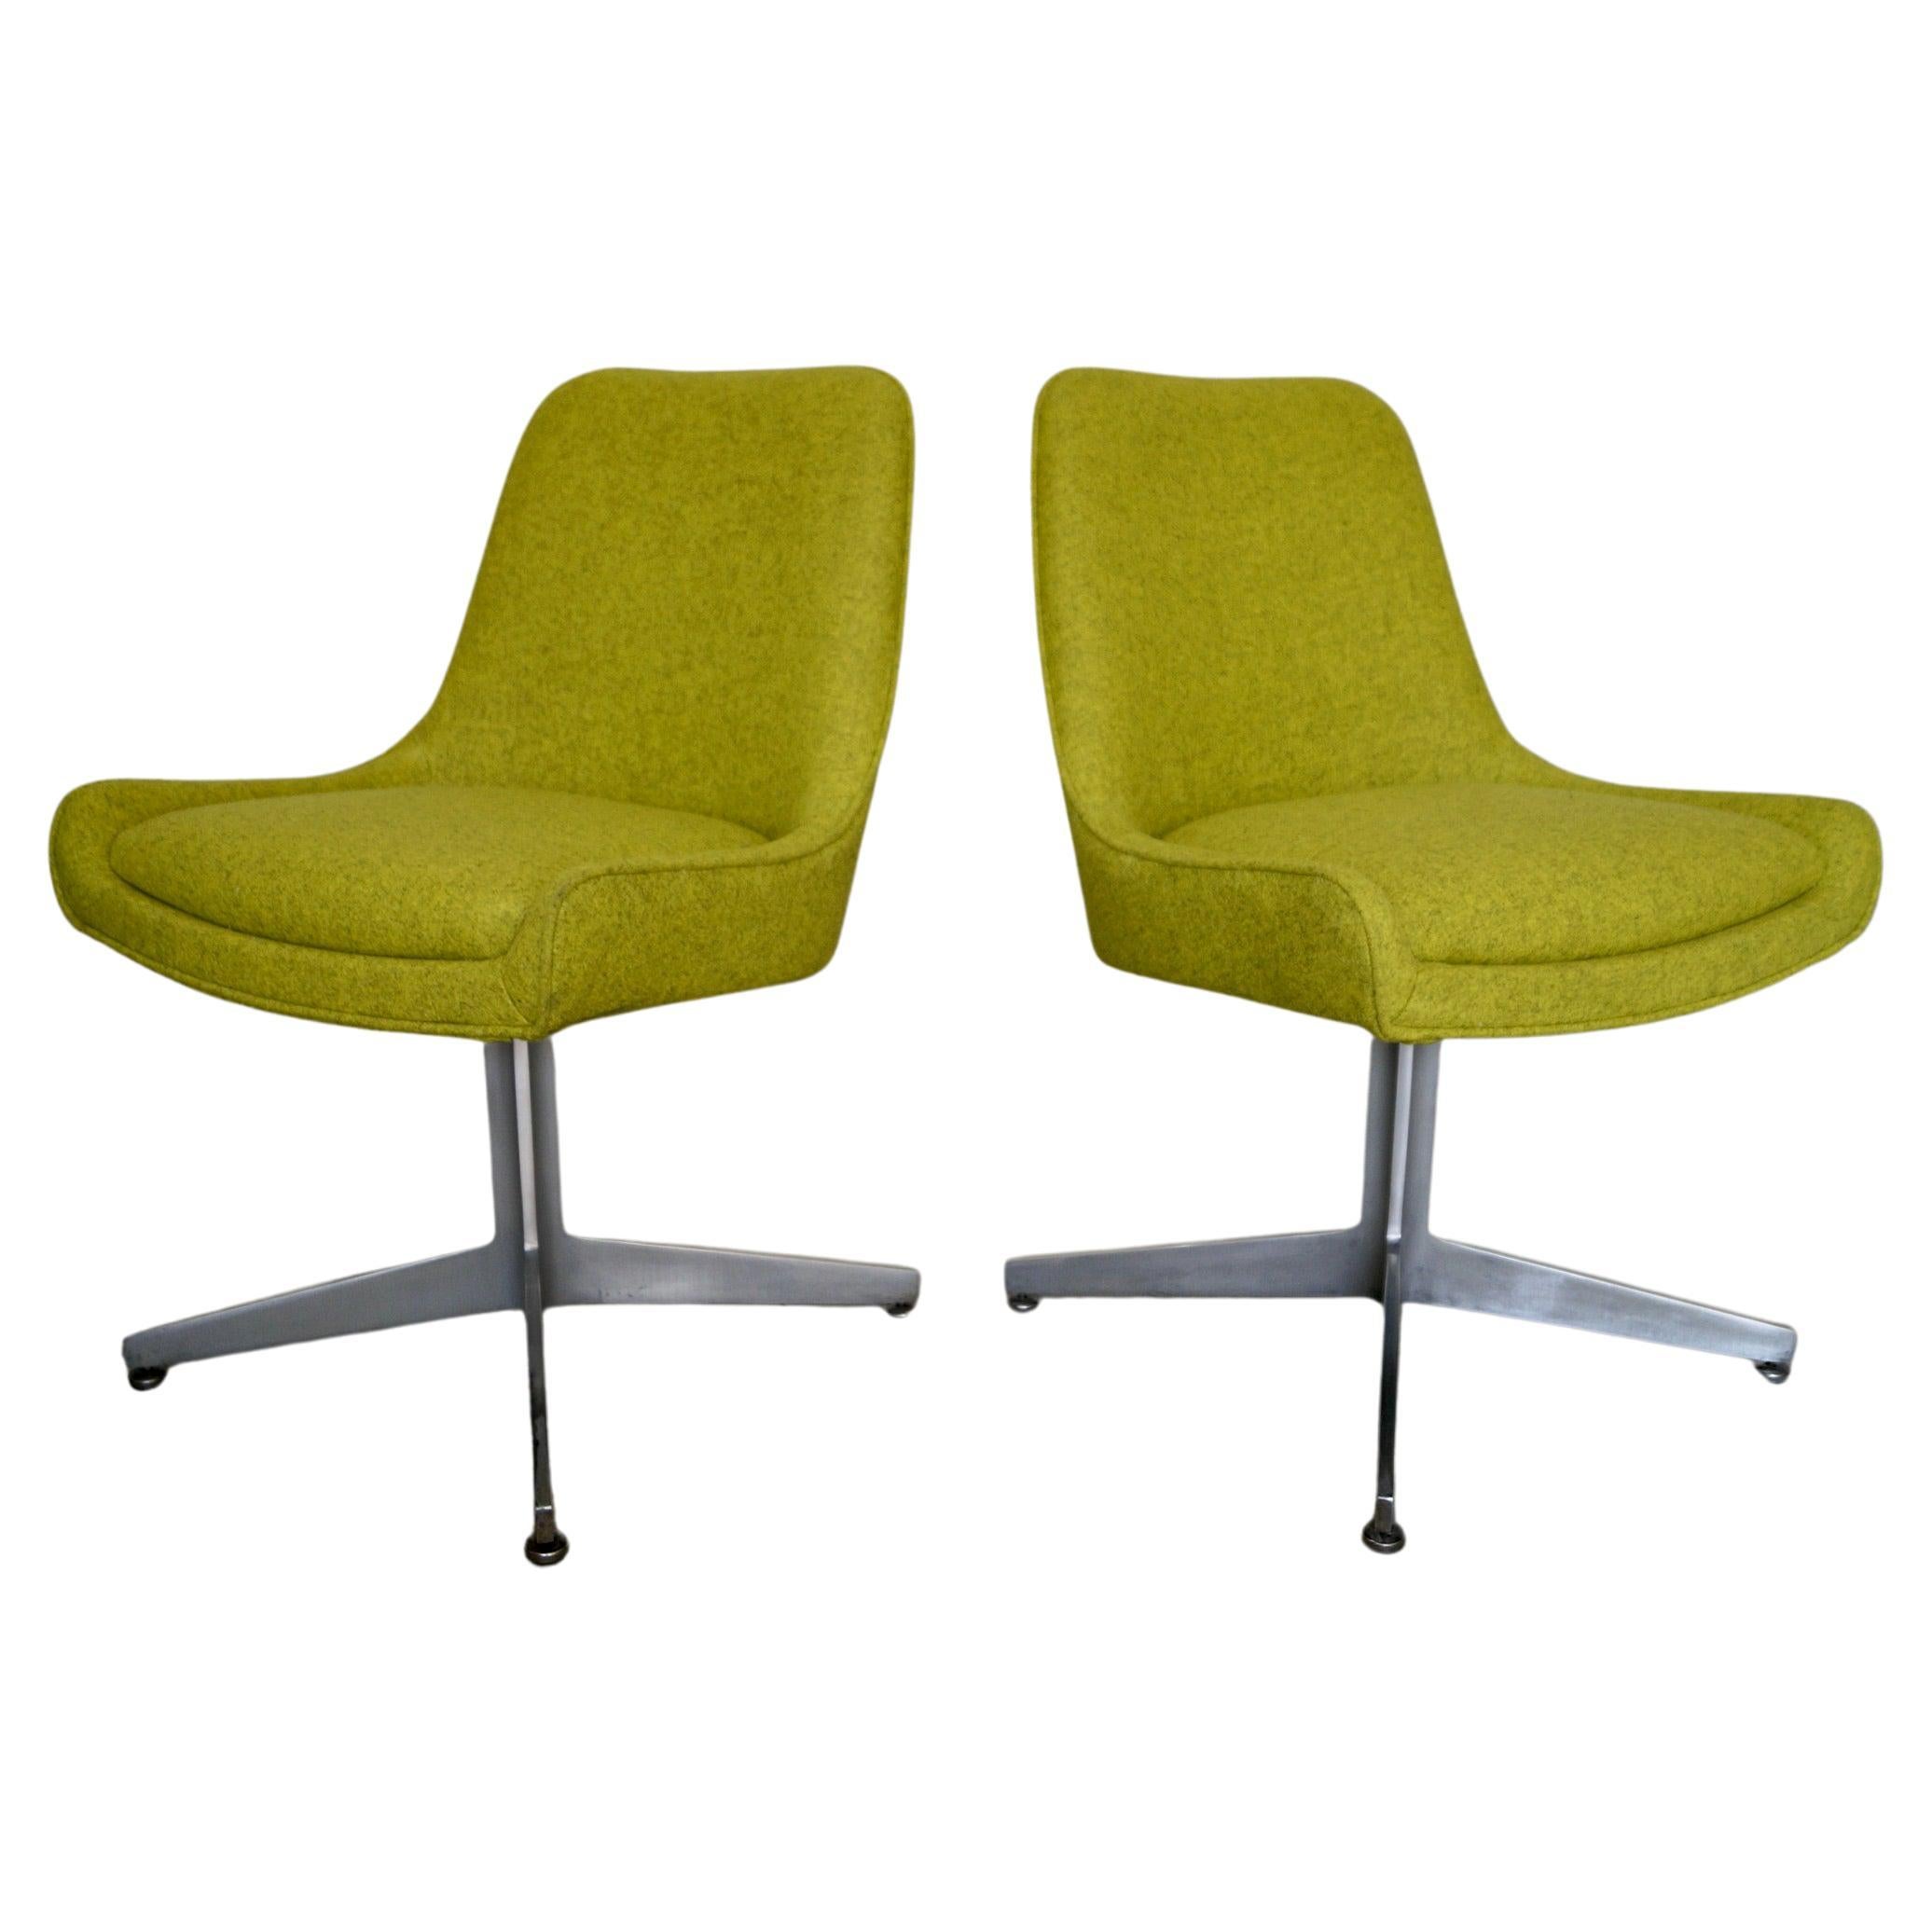 1960's Mid-Century Modern Side Chairs, a Pair For Sale